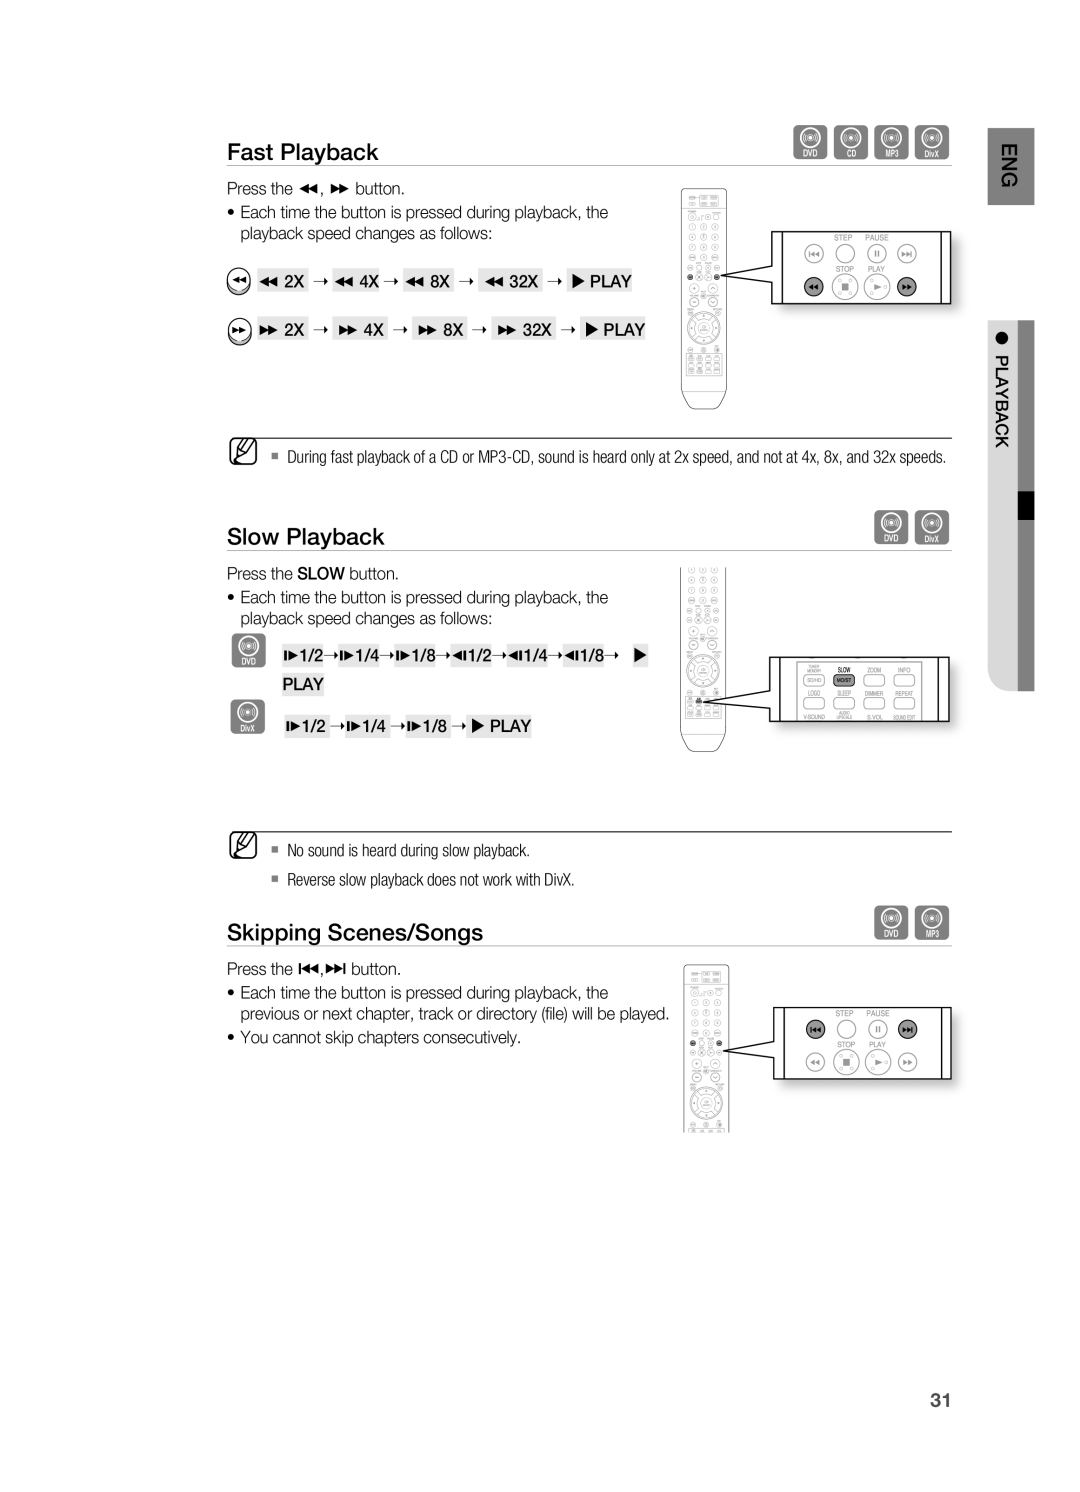 Samsung HT-X710 user manual Slow Playback, Skipping Scenes/Songs, Fast Playback 